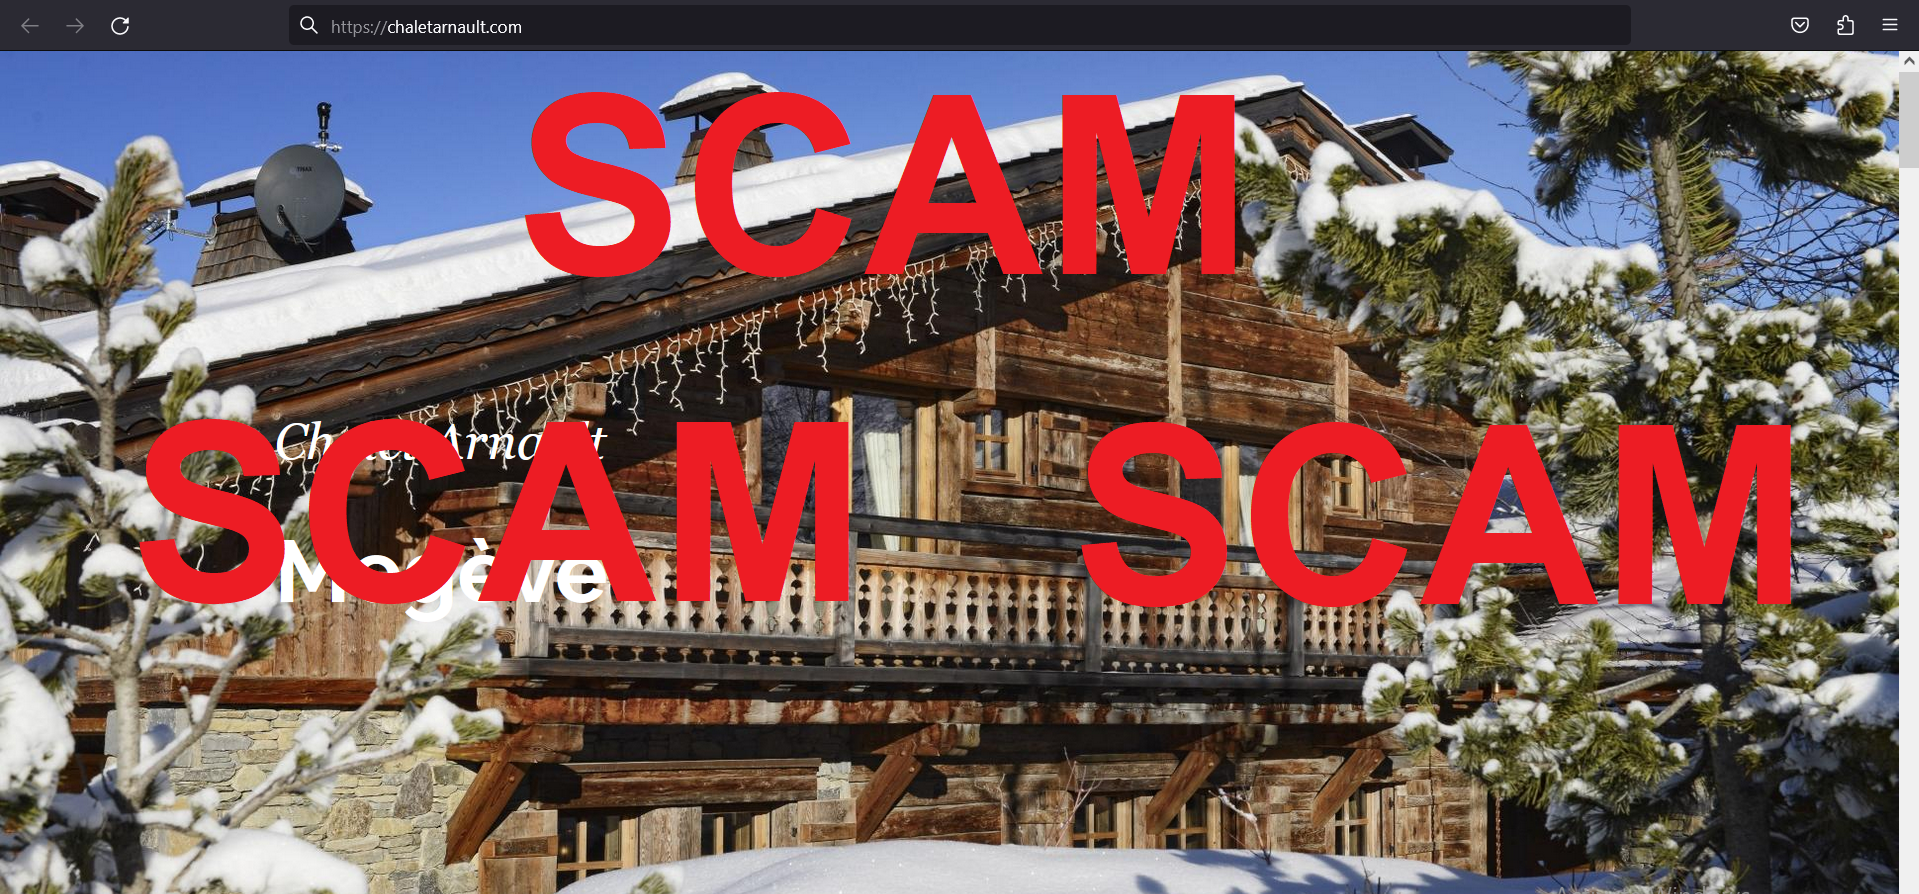 You are currently viewing Fraudulent website: chaletarnault.com SCAM SCAM